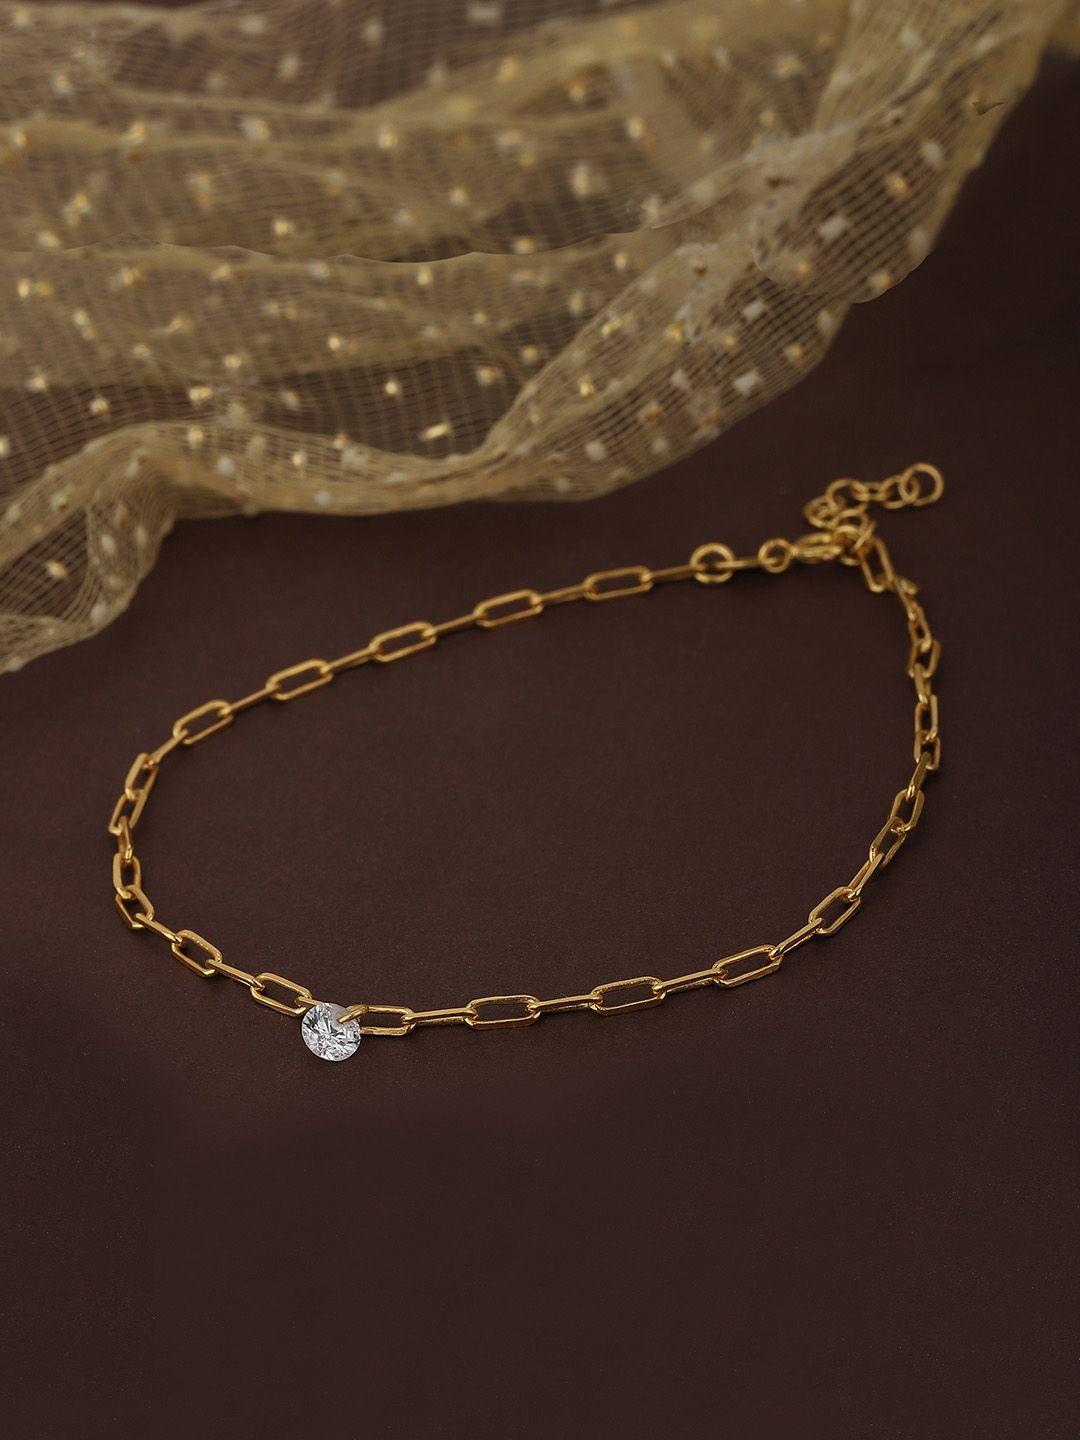 carlton-london-gold-plated-handcrafted-anklet